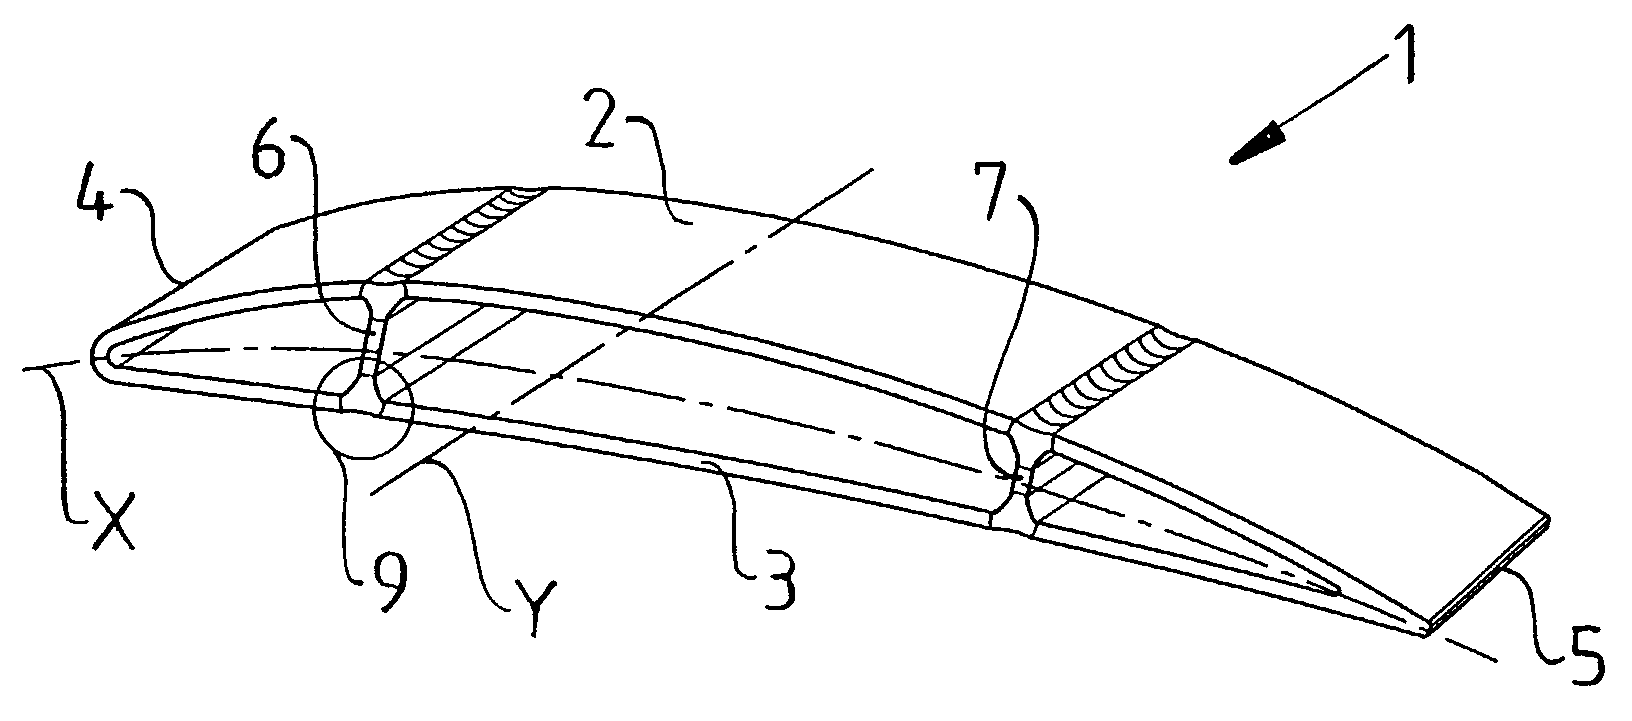 Method for manufacturing a hollow blade for a stator or rotor component